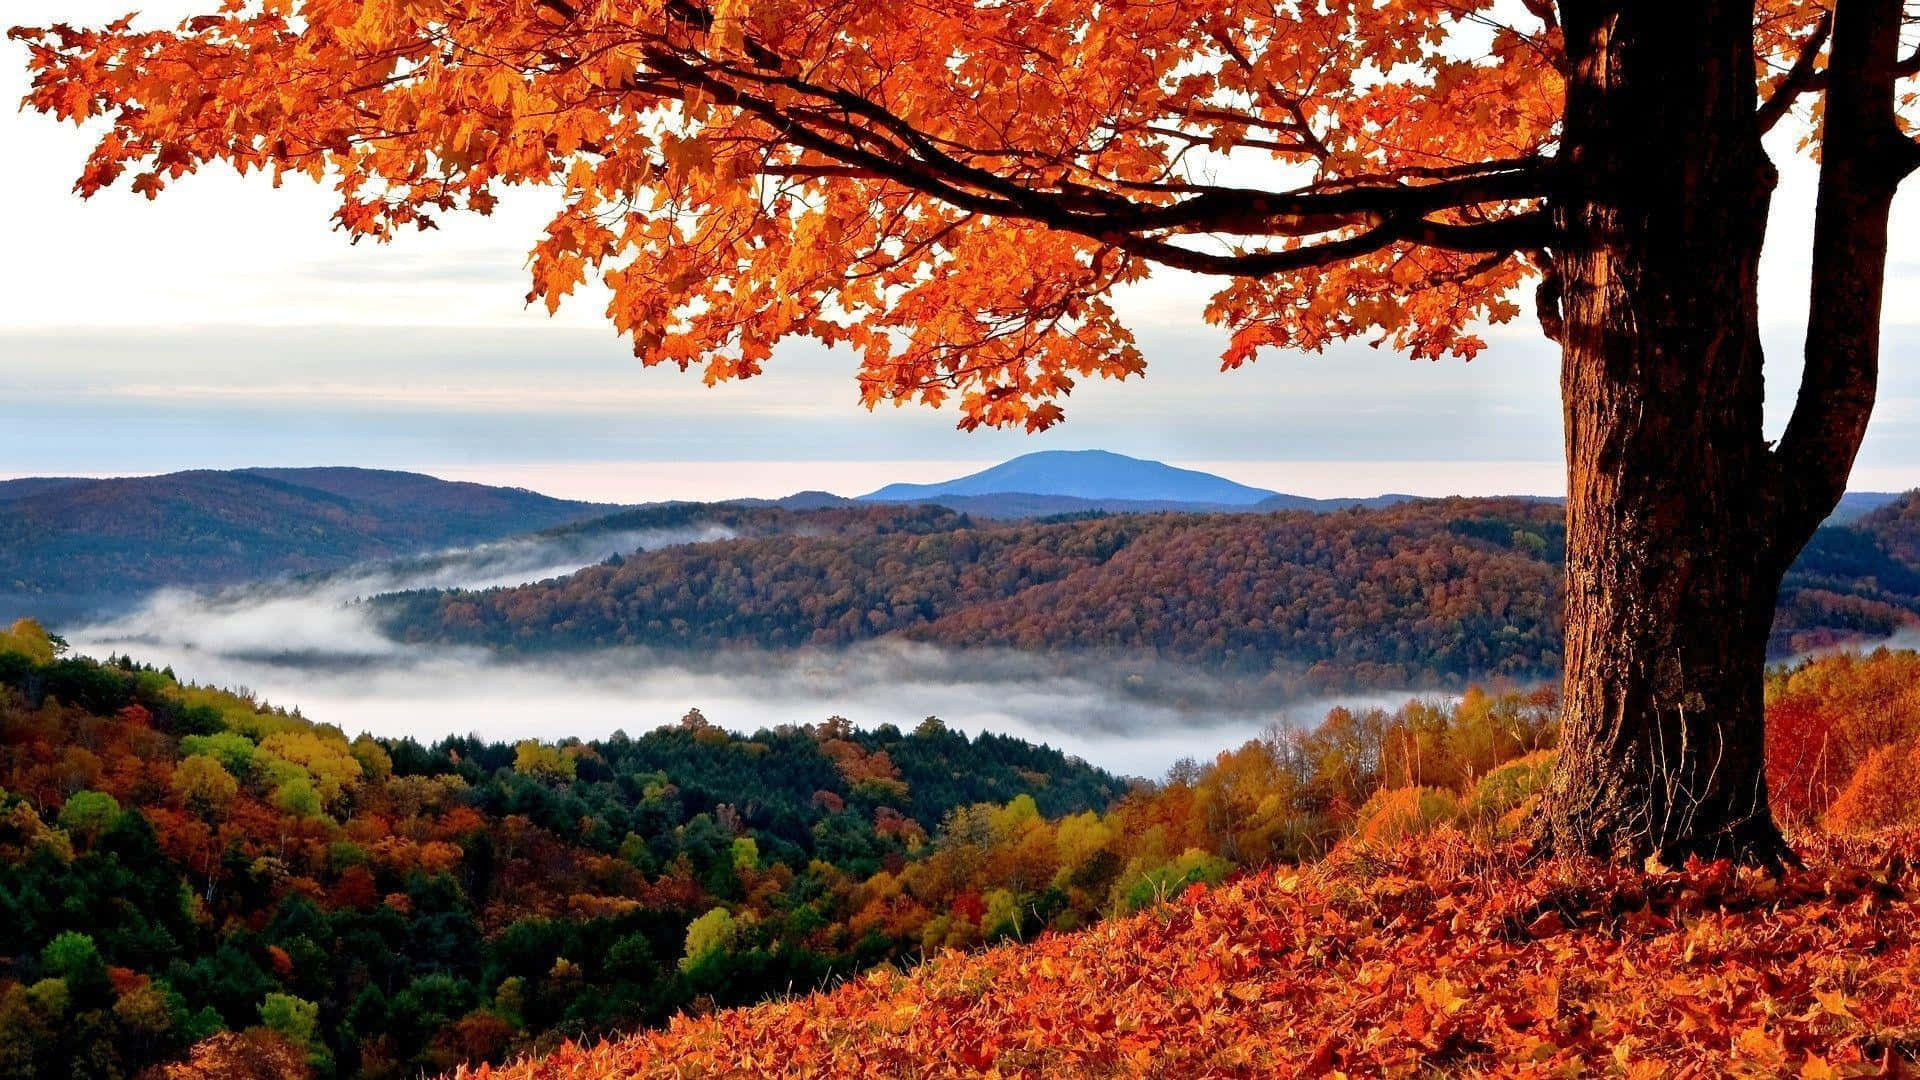 Download Mesmerizing Autumn Scenery with Vibrant Colors | Wallpapers.com